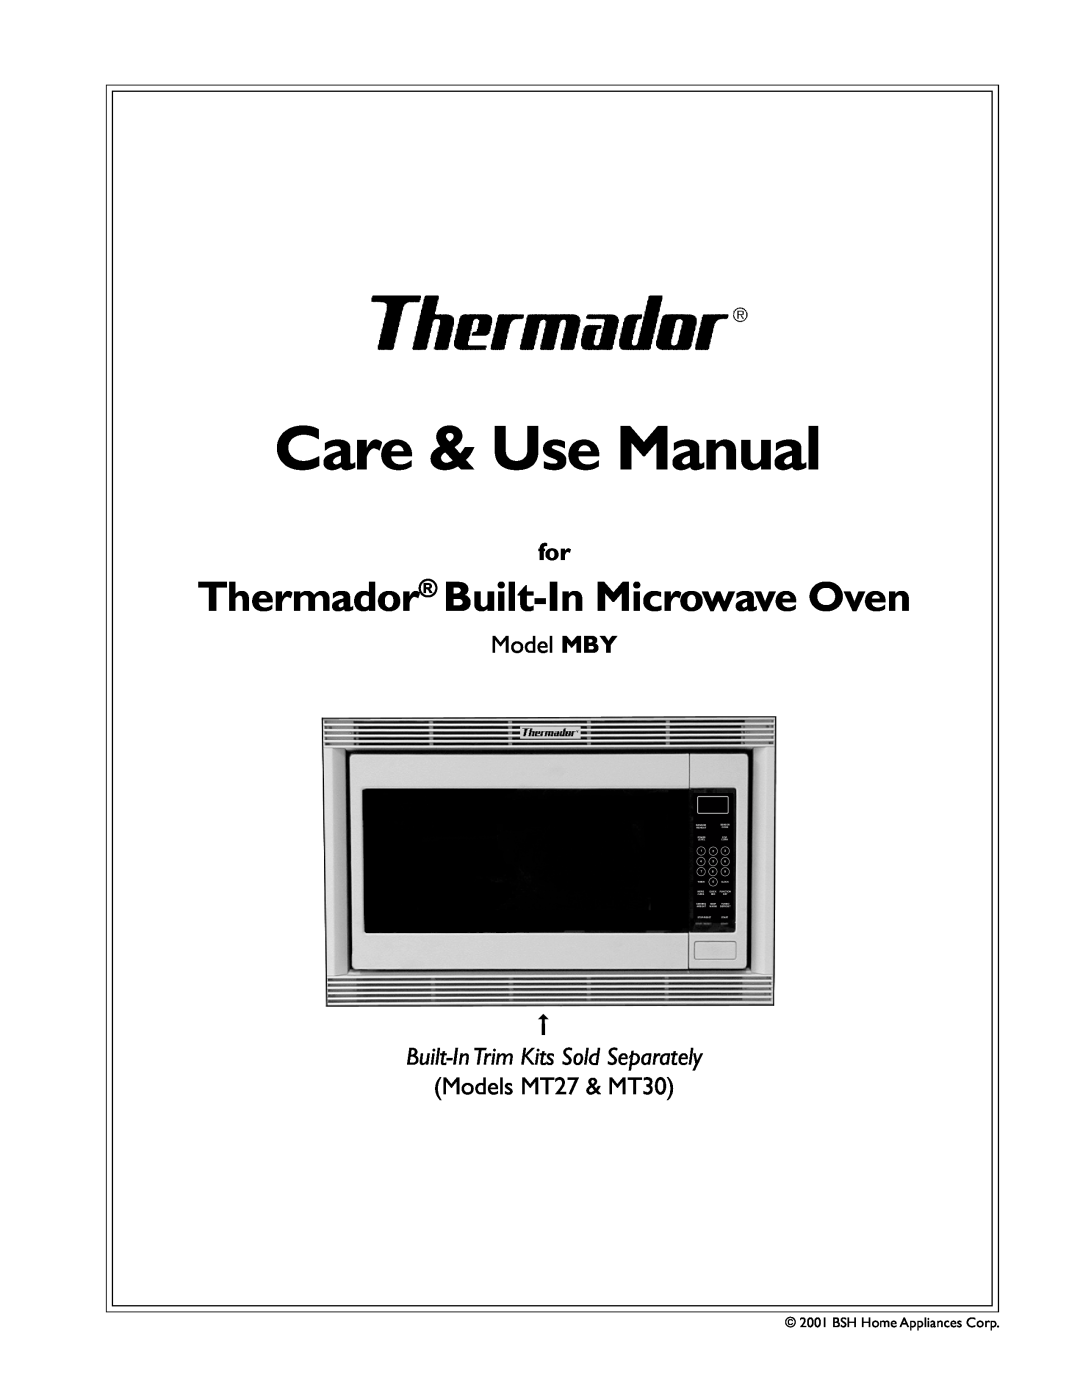 Thermador MT27 manual Thermador Built-In Microwave Oven, Care & Use Manual, Model MBY, Built-In Trim Kits Sold Separately 